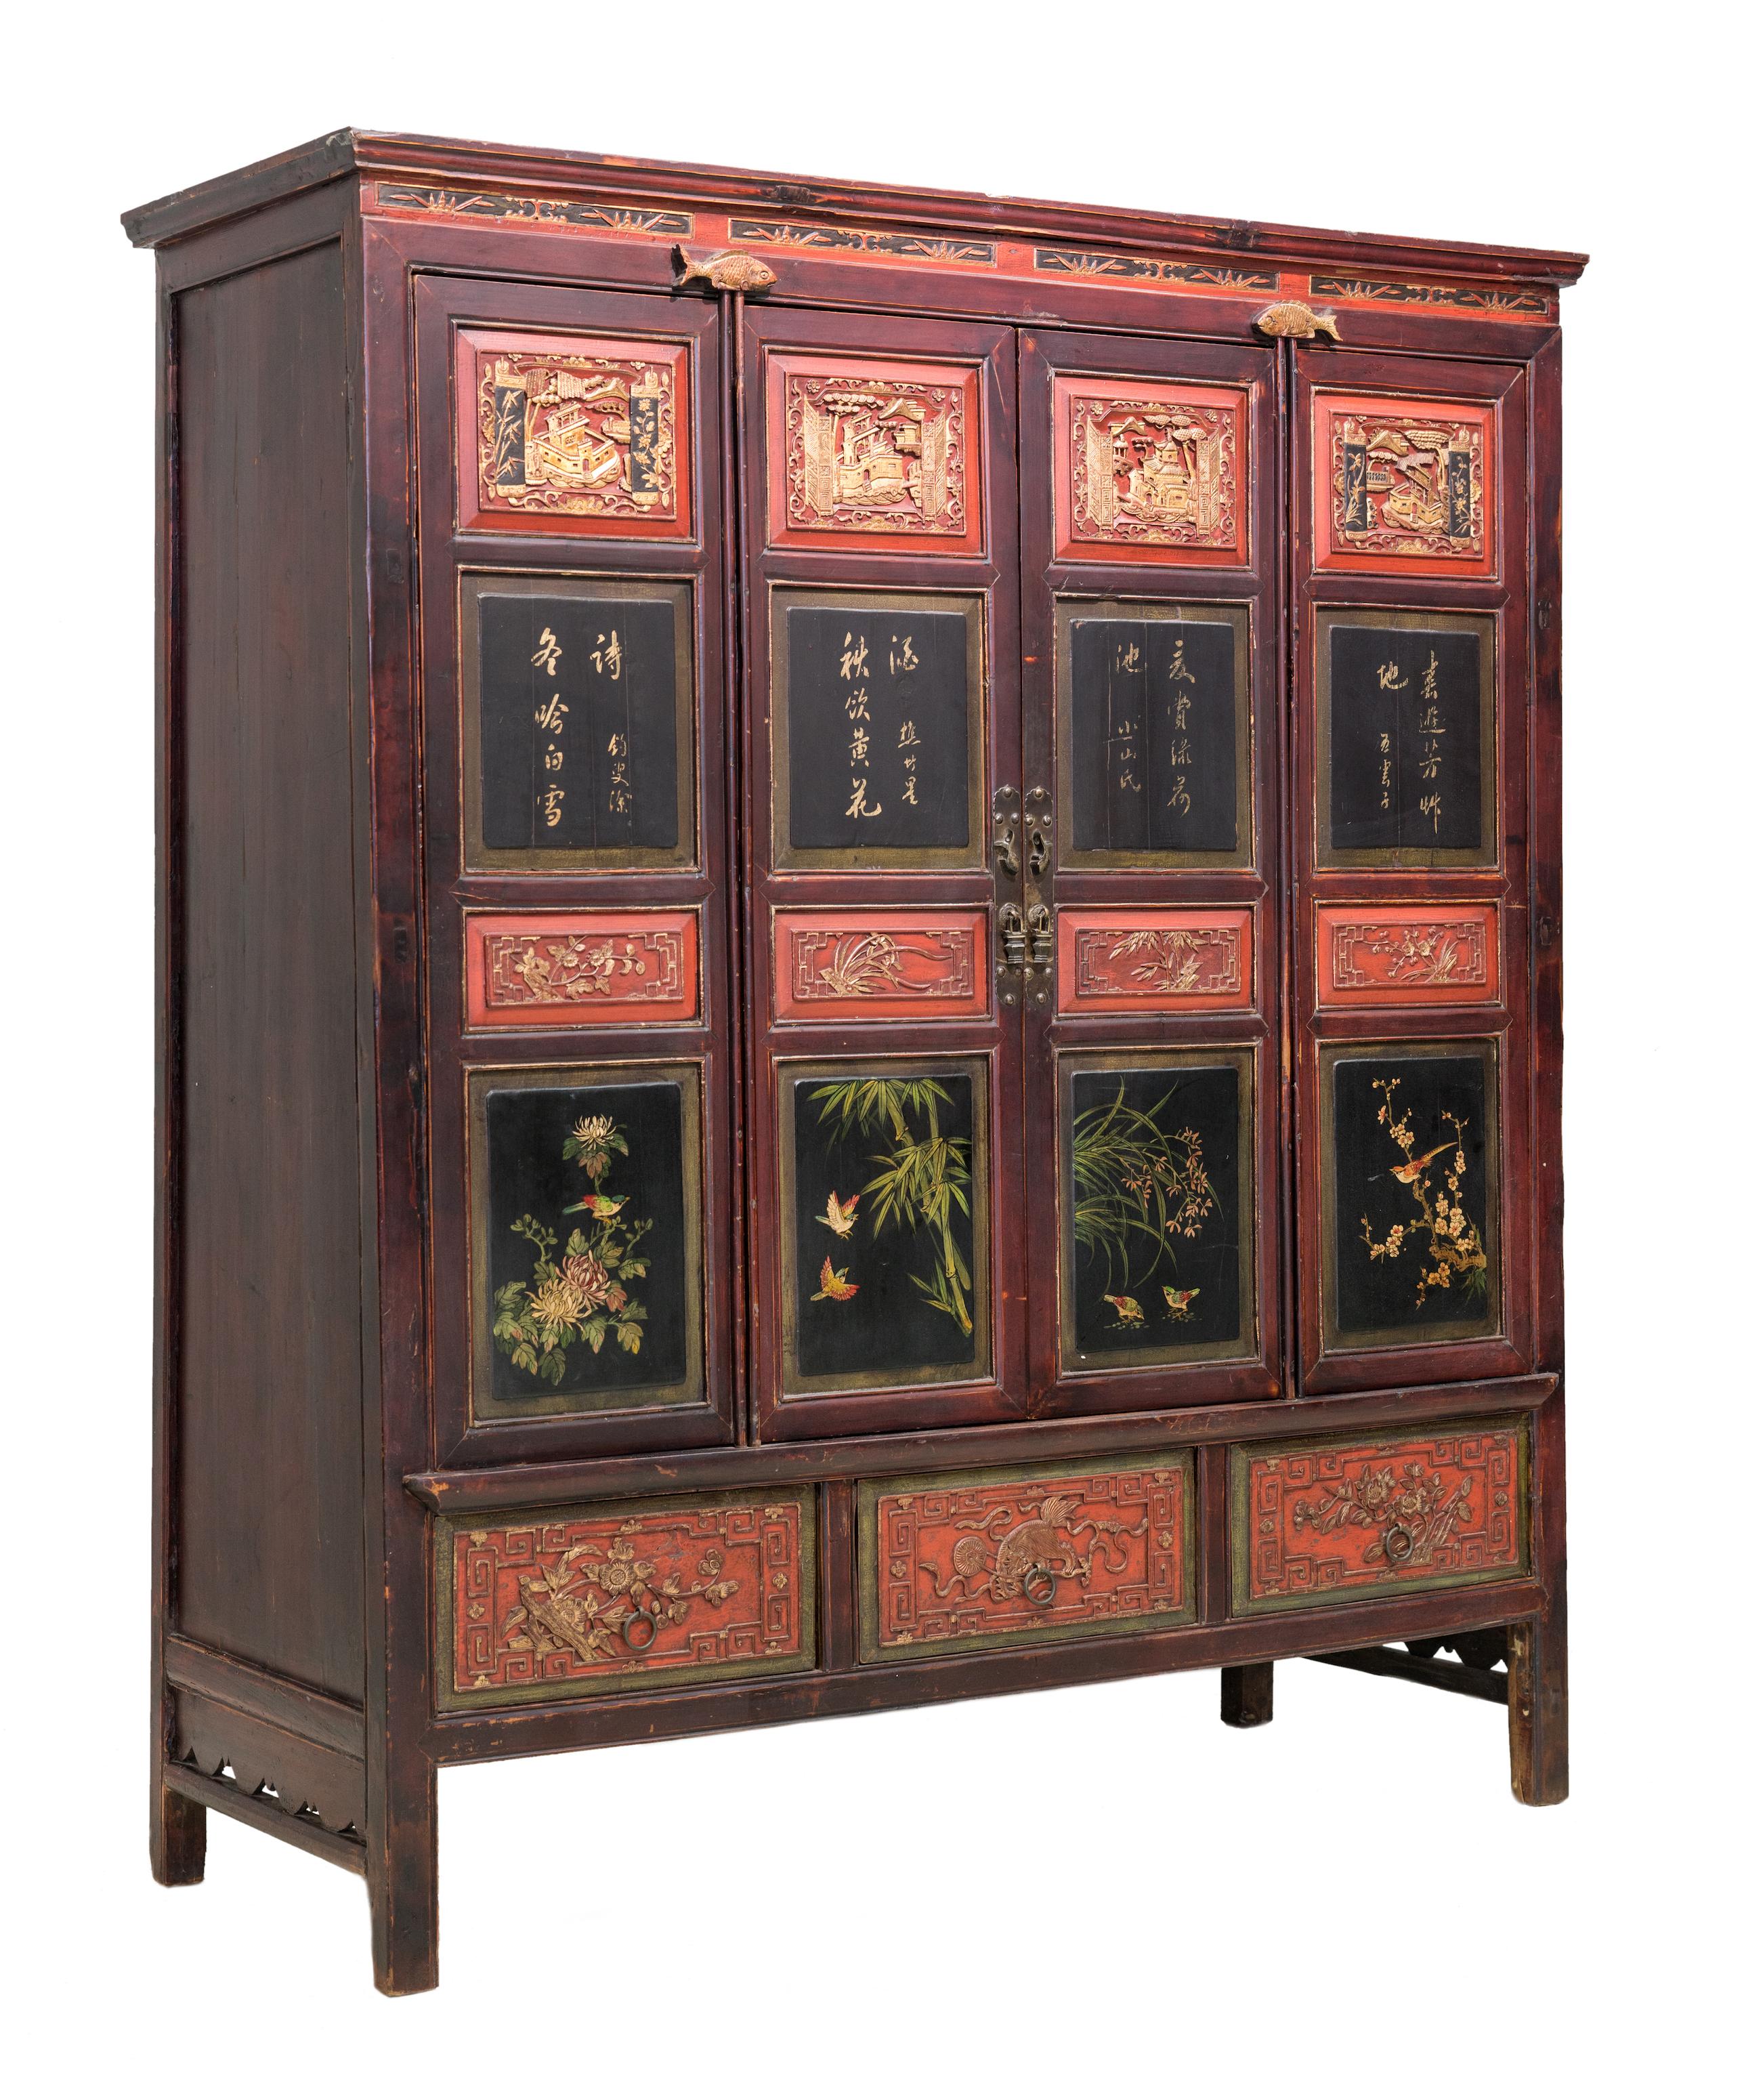 Late 19th century 4-door cabinet from Dong Yang, Zhejiang province, China. Very fine carvings on the four panels across the top and on the bottom three drawers. The slim middle carved panels have designs of different flowers representing the four